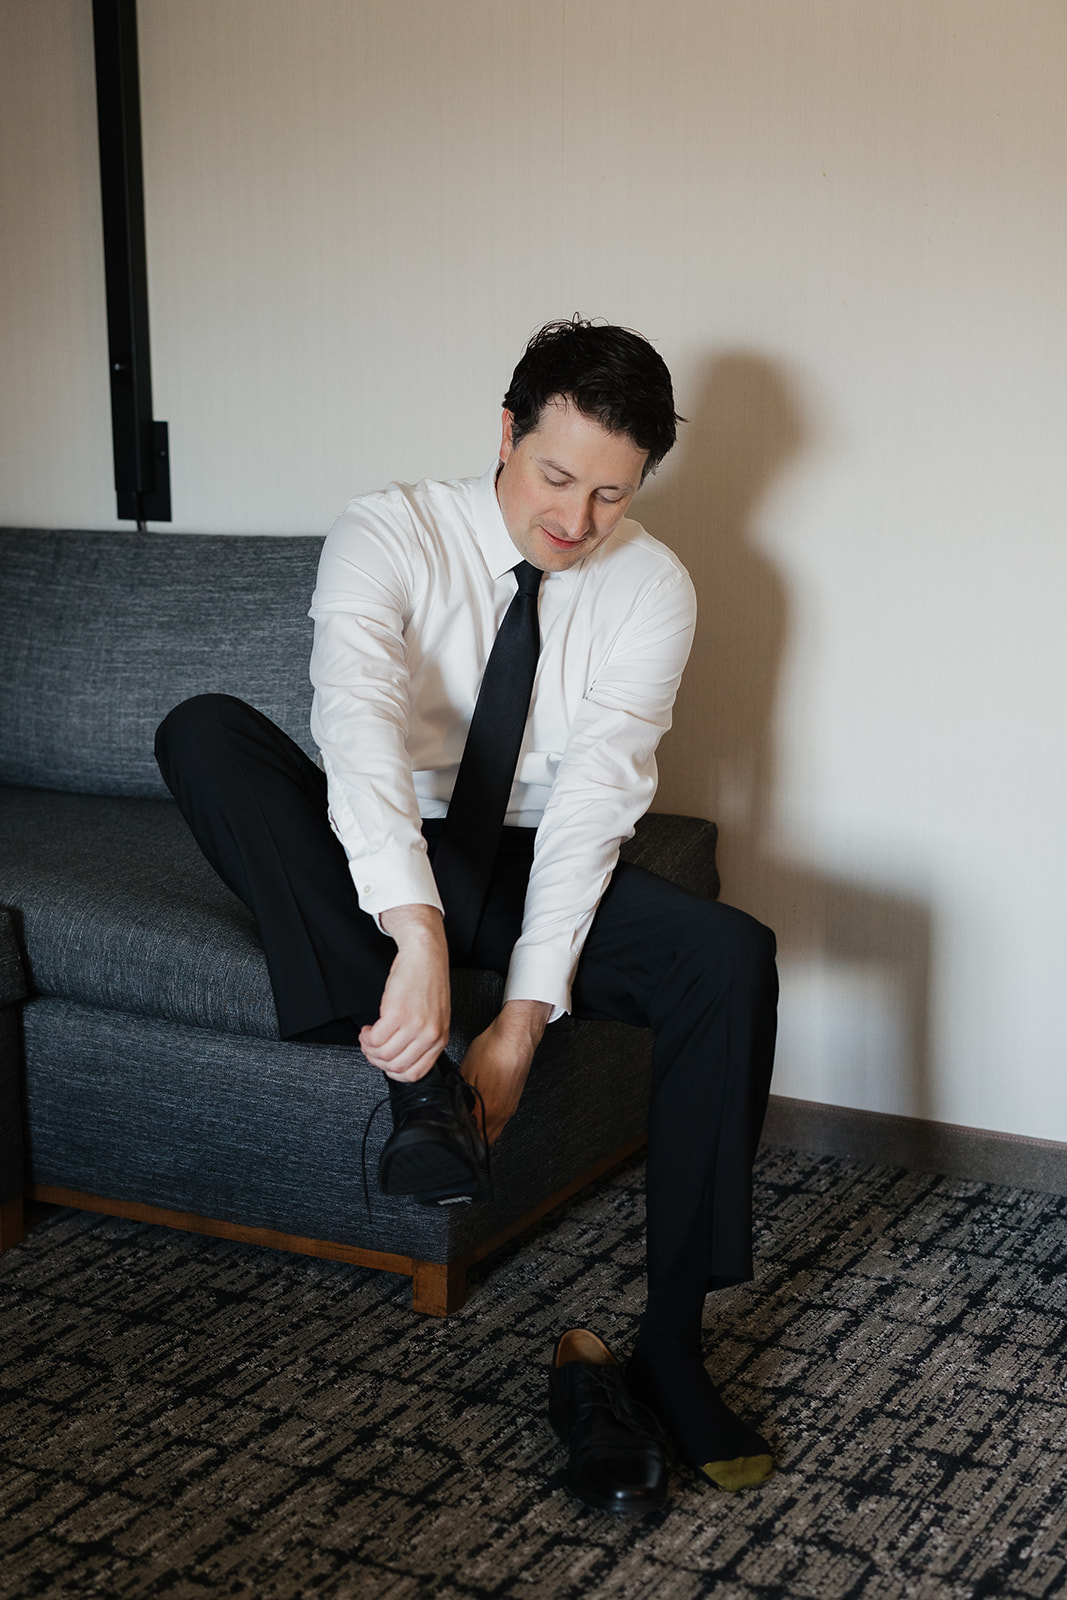 Groom sitting on a couch and putting on his shoes